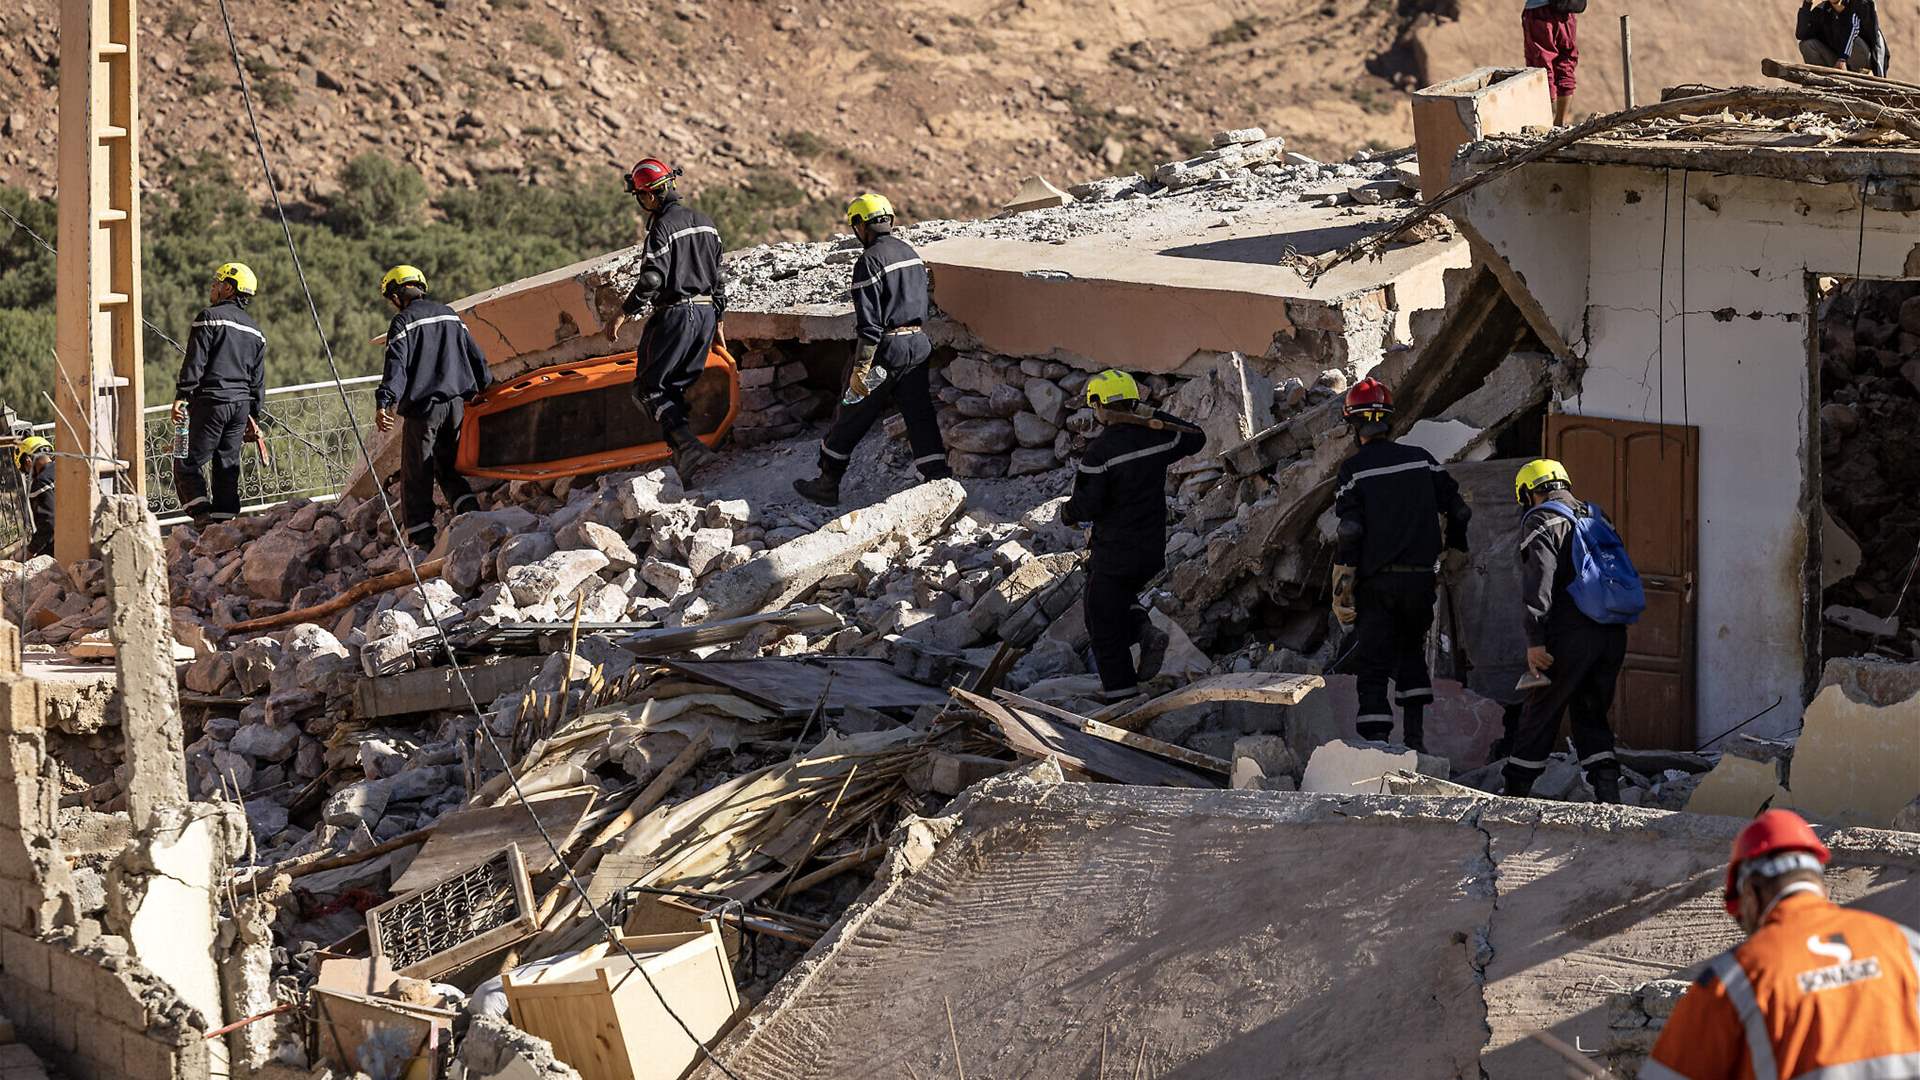 Rescue teams intensify efforts in villages destroyed by Morocco earthquake